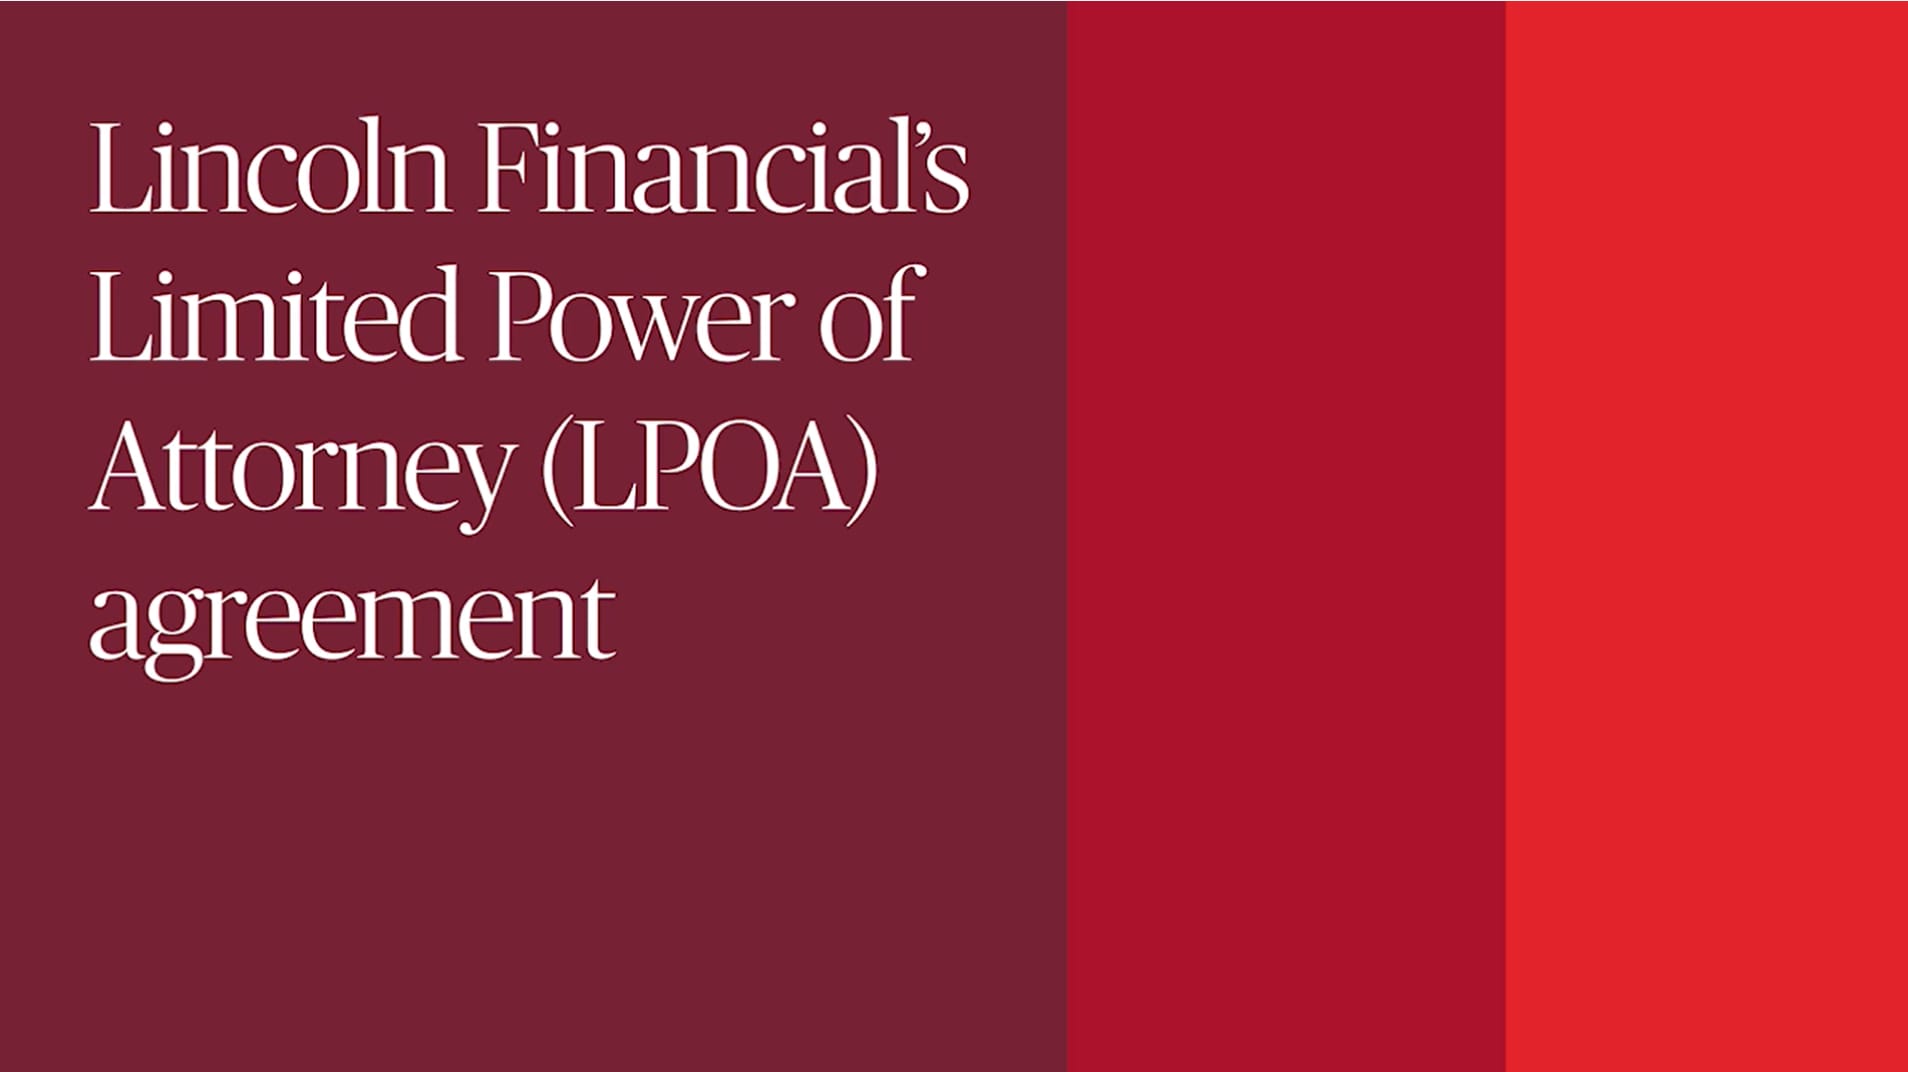 Lincoln Financial's Limited Power of Attorney (LPOA) agreement